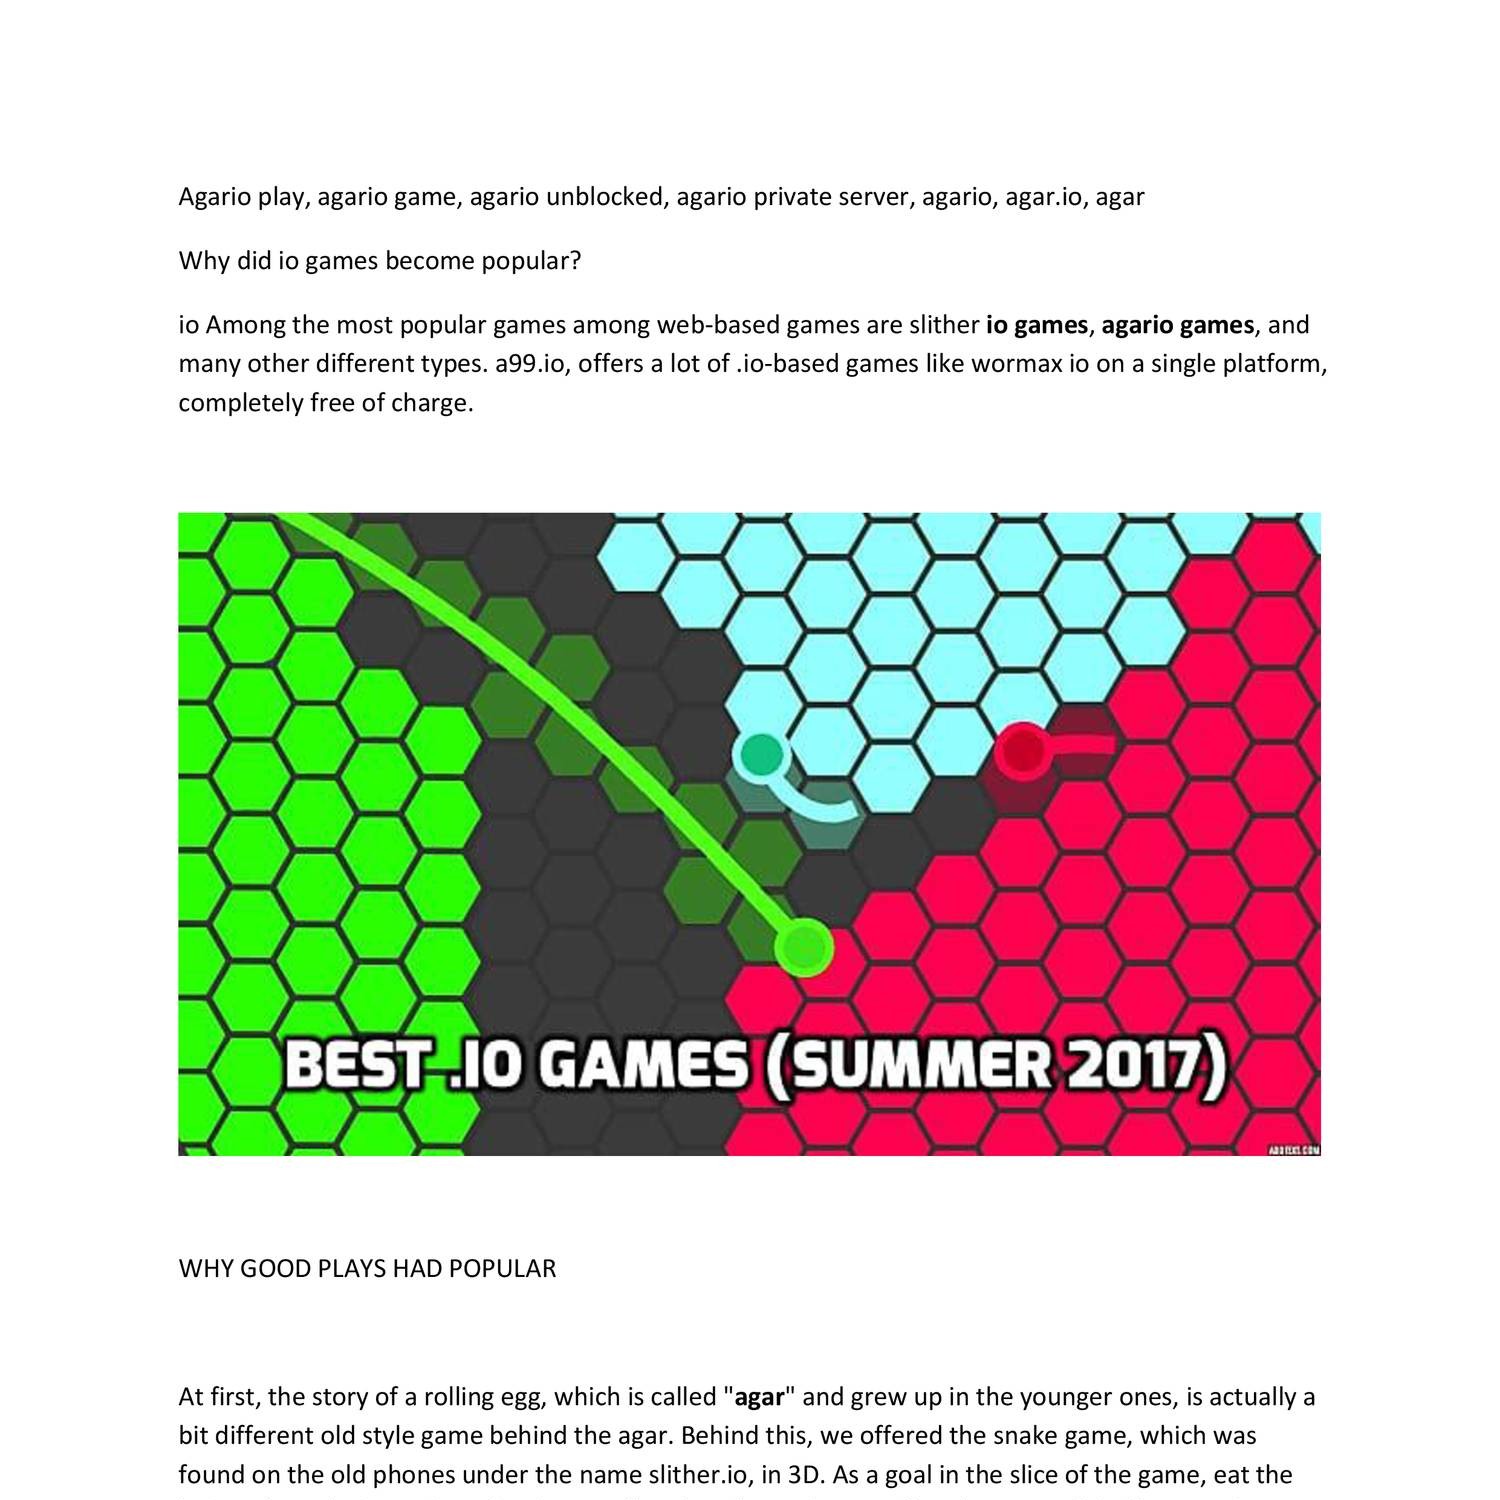 Why did io games become popular.docx